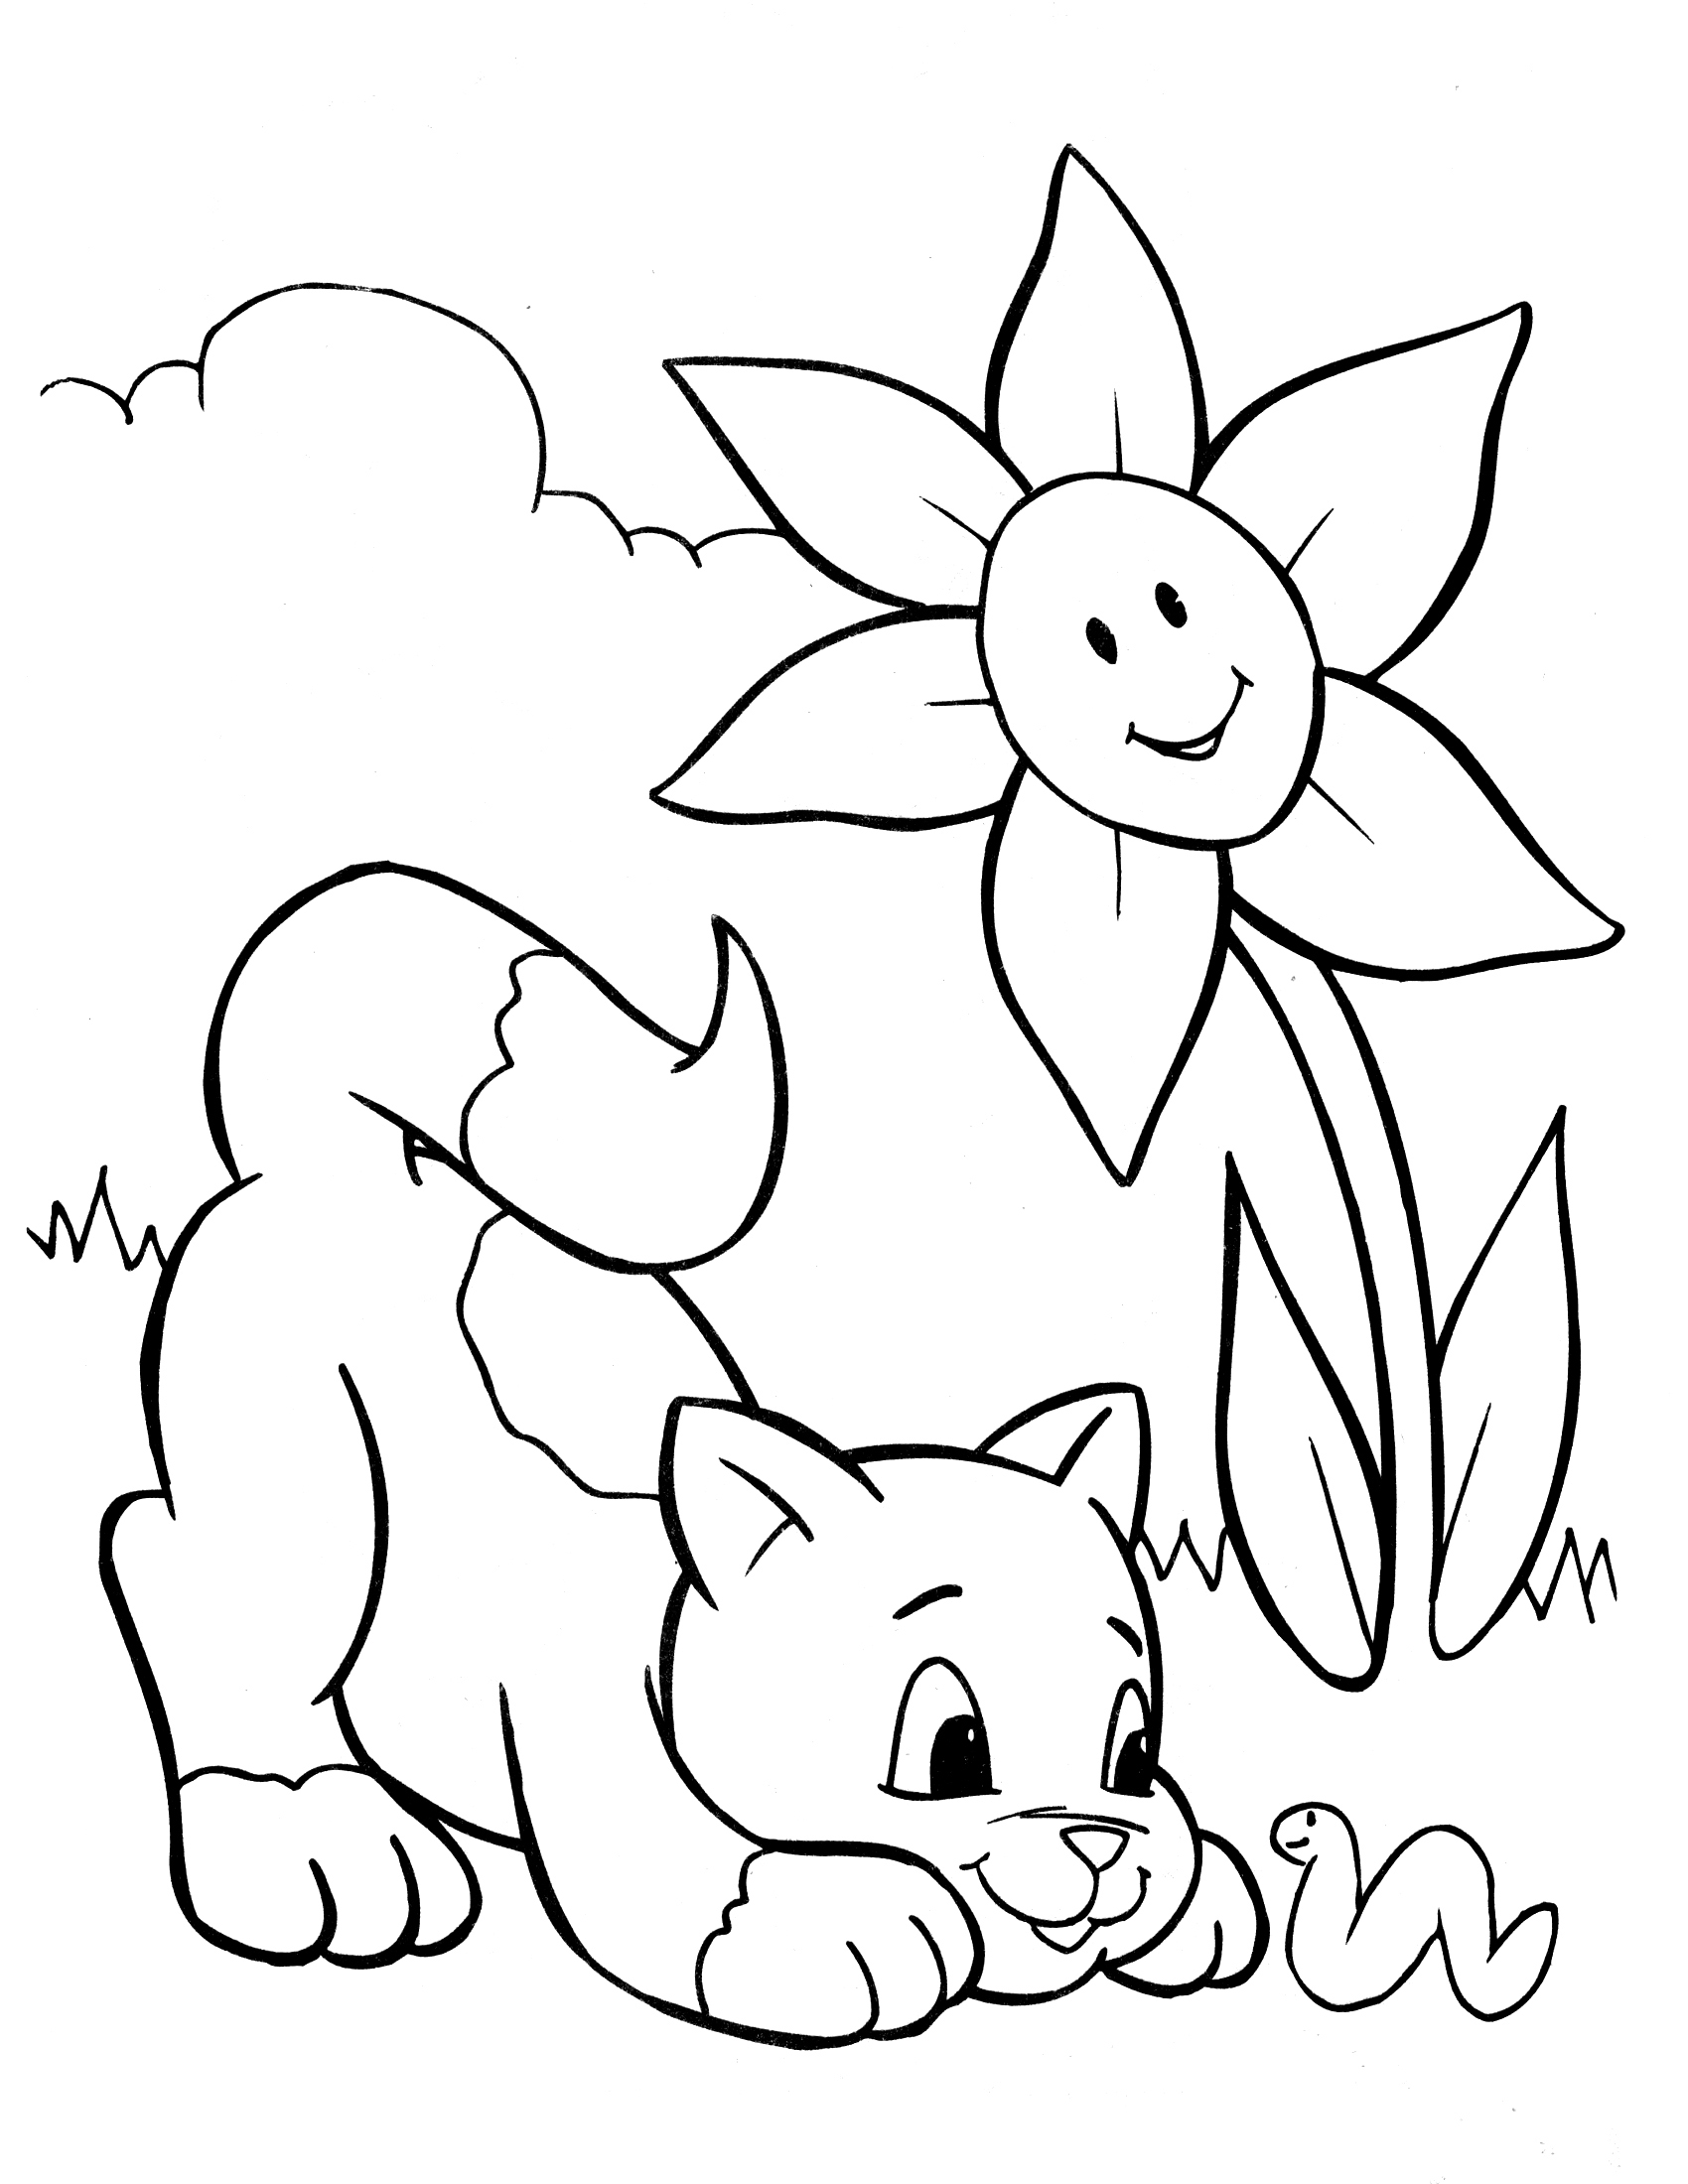 www-crayola-com-free-coloring-pages-at-getcolorings-free